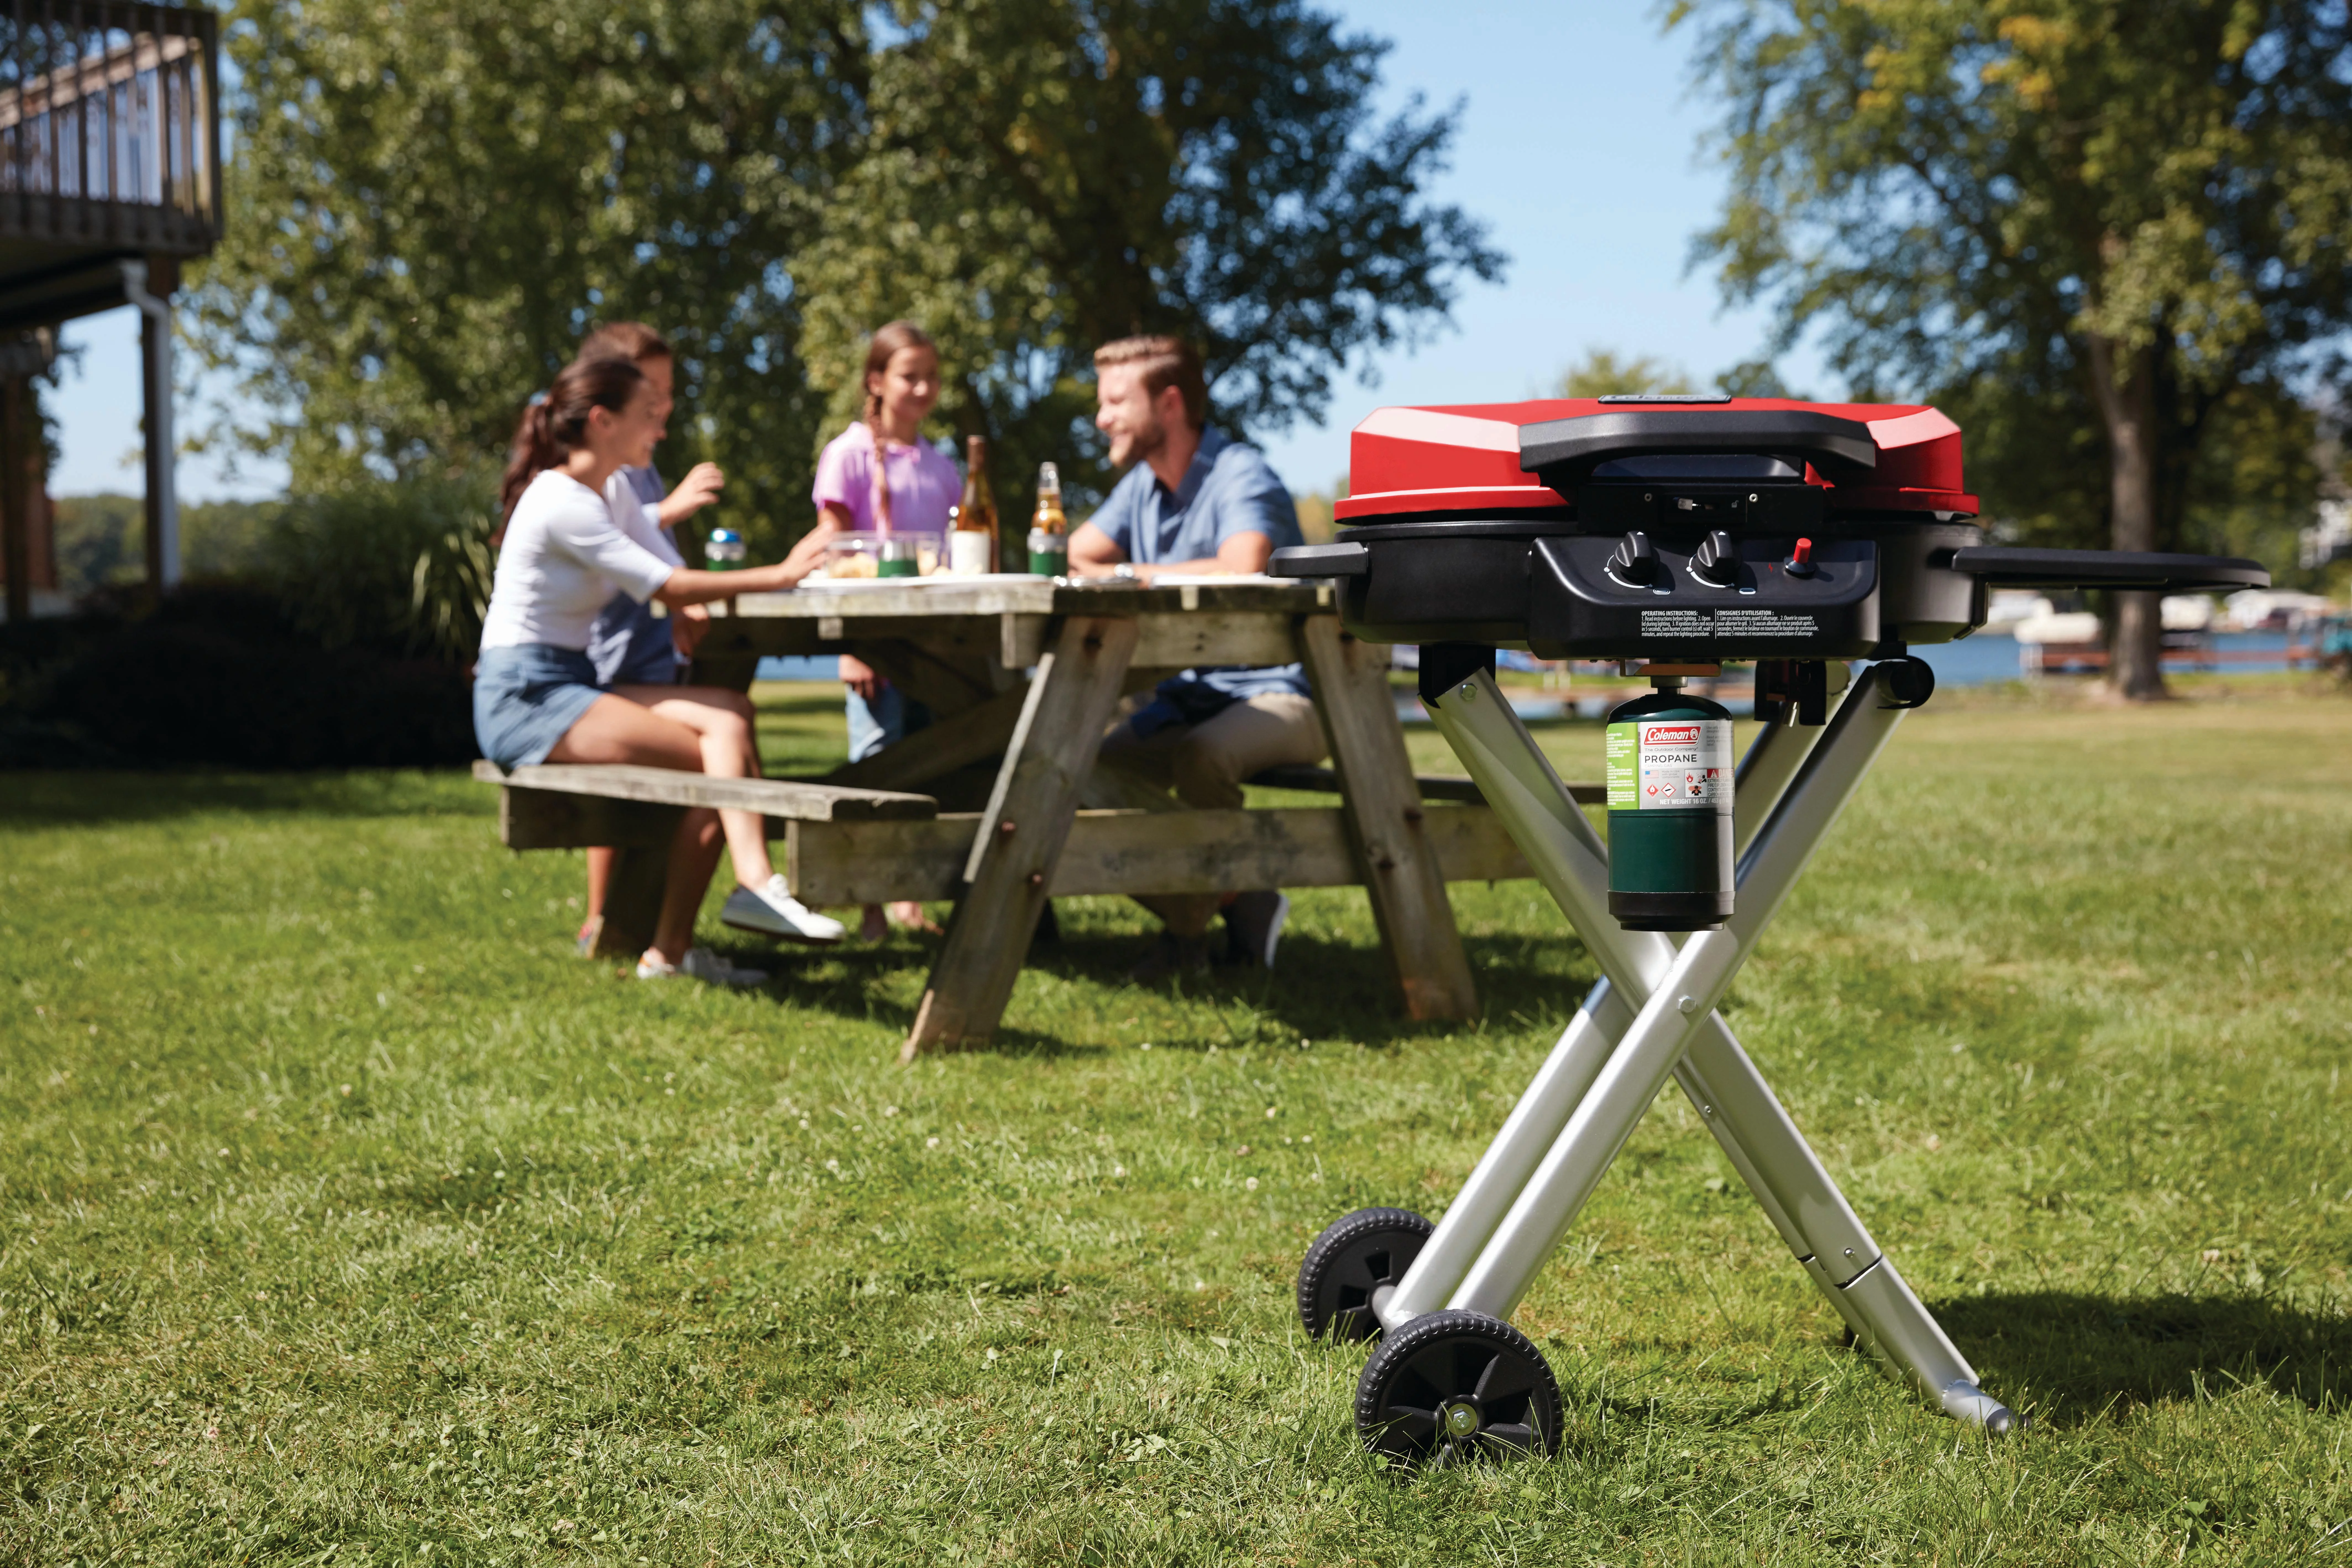 Portable Coleman BBQ with people in the background